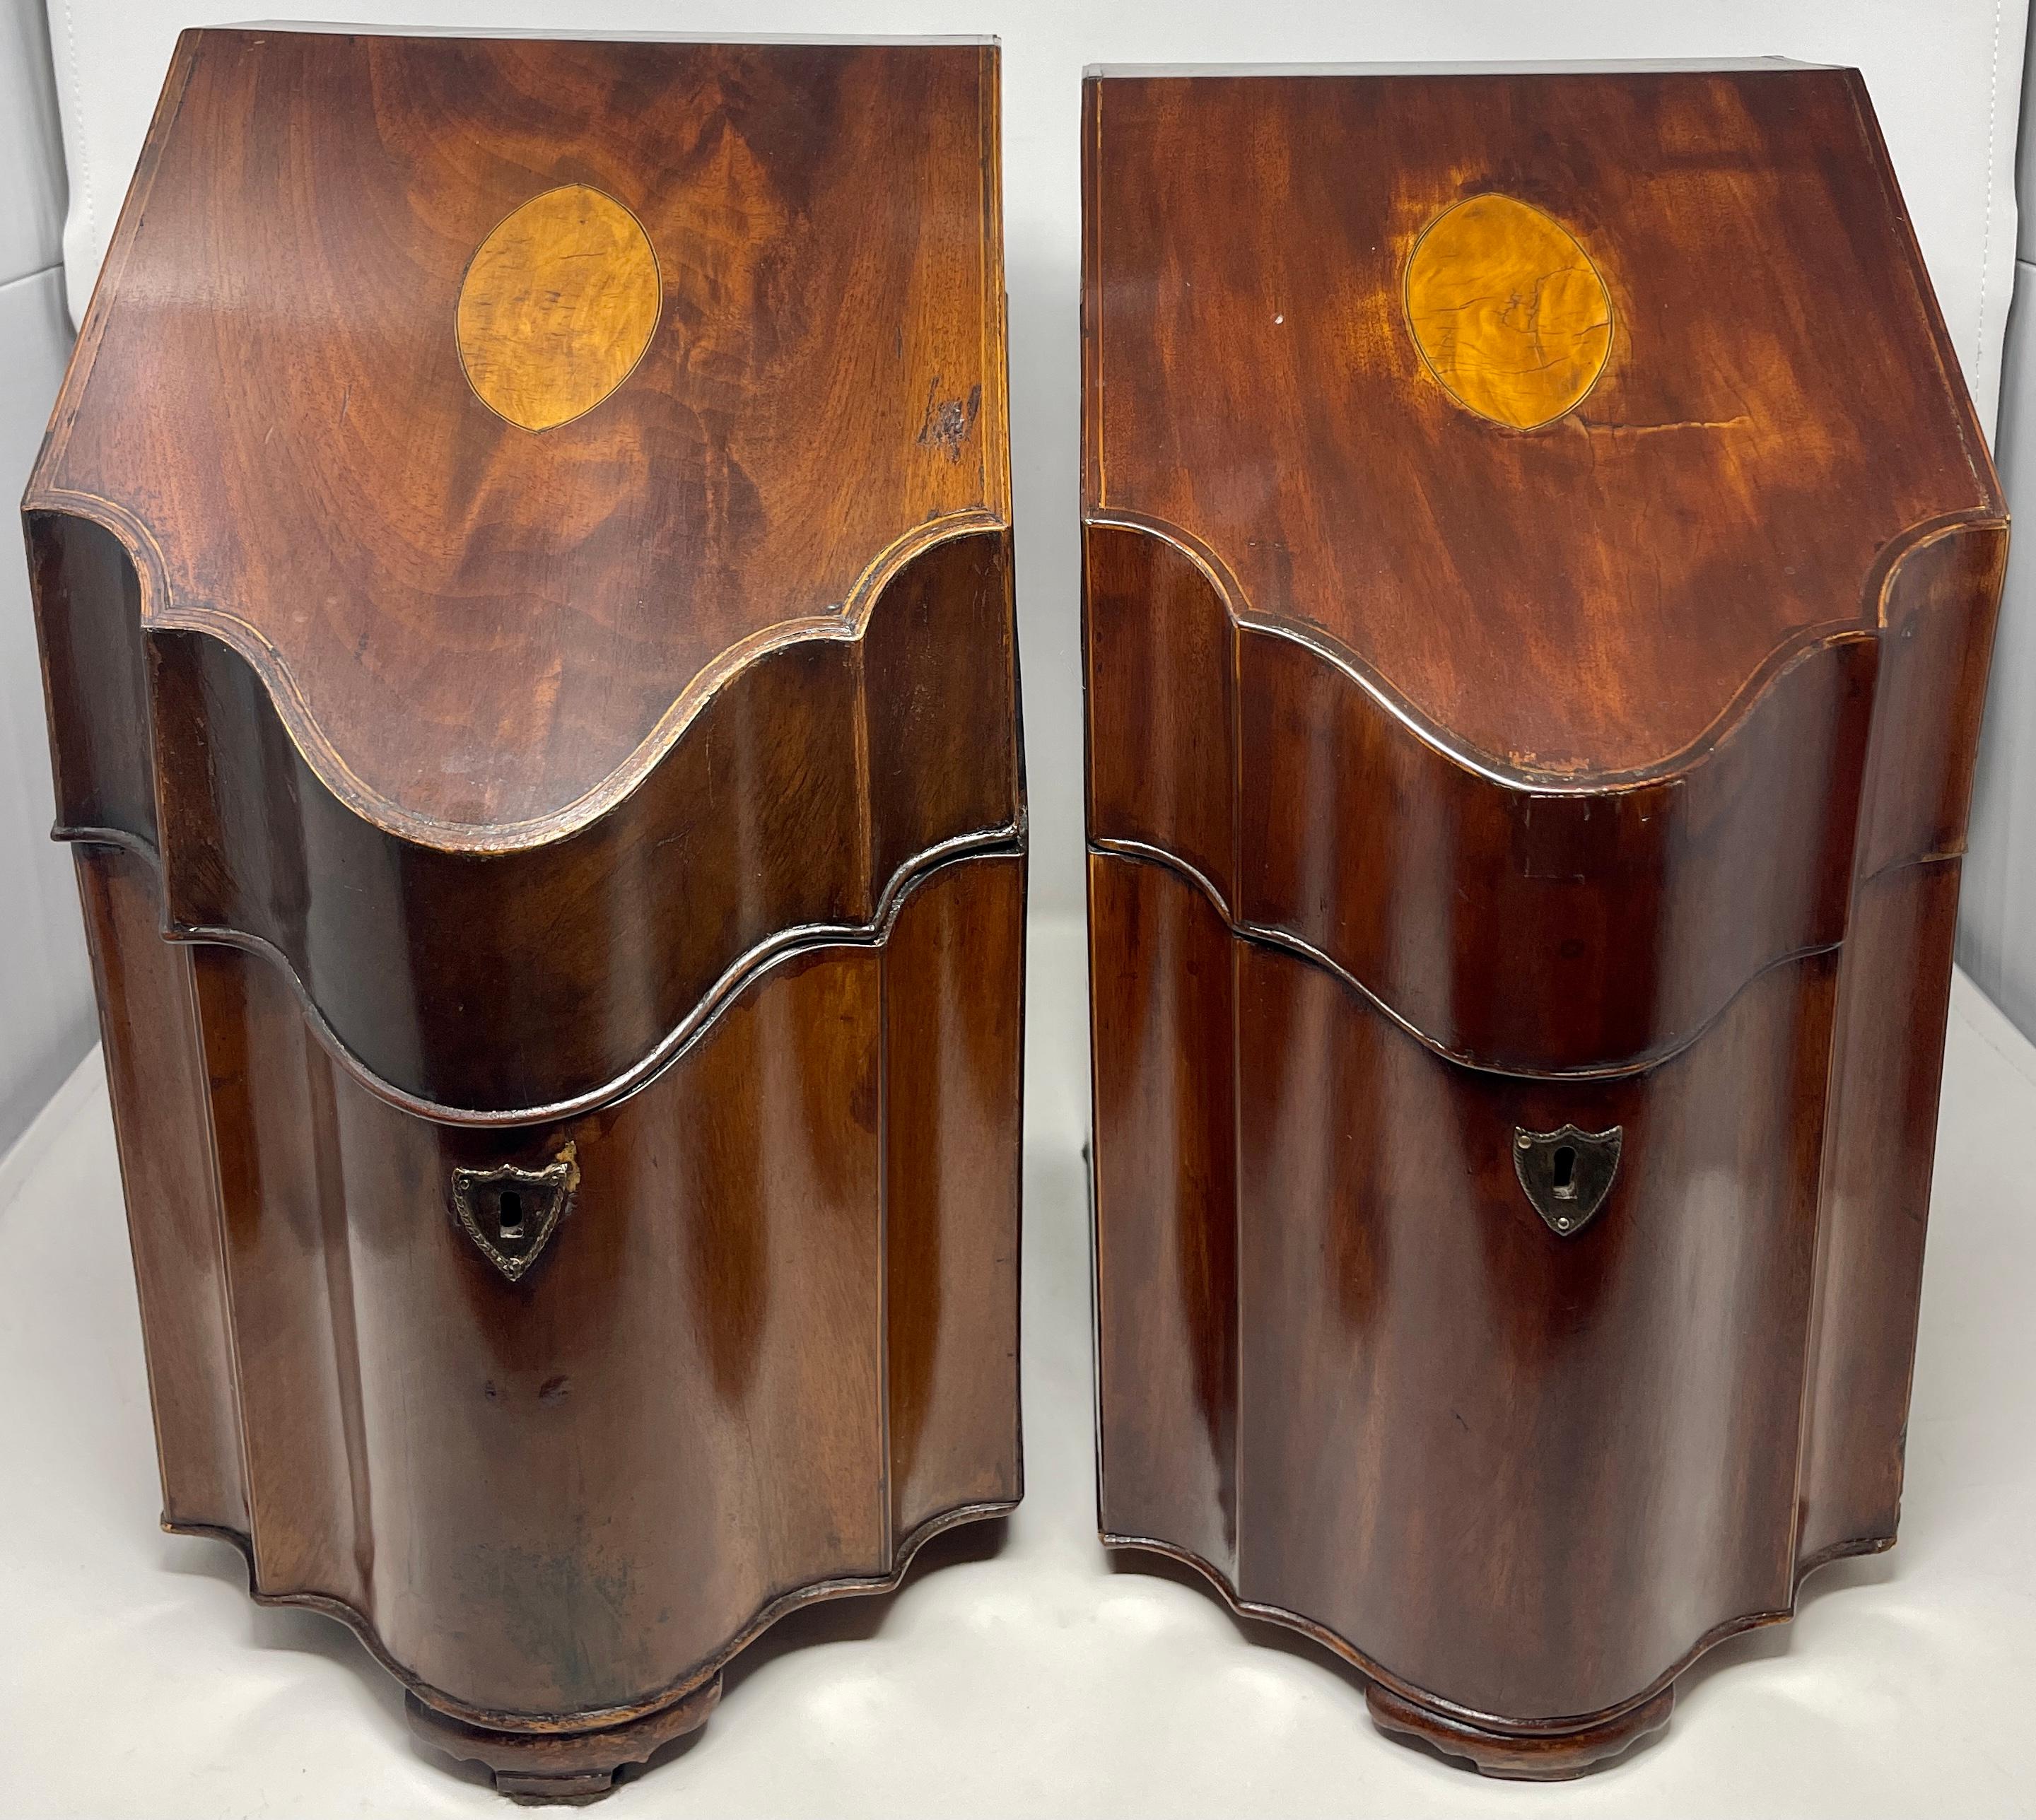 Pair Antique George III mahogany with inlay cutlery or knife boxes, circa 1820-1830.